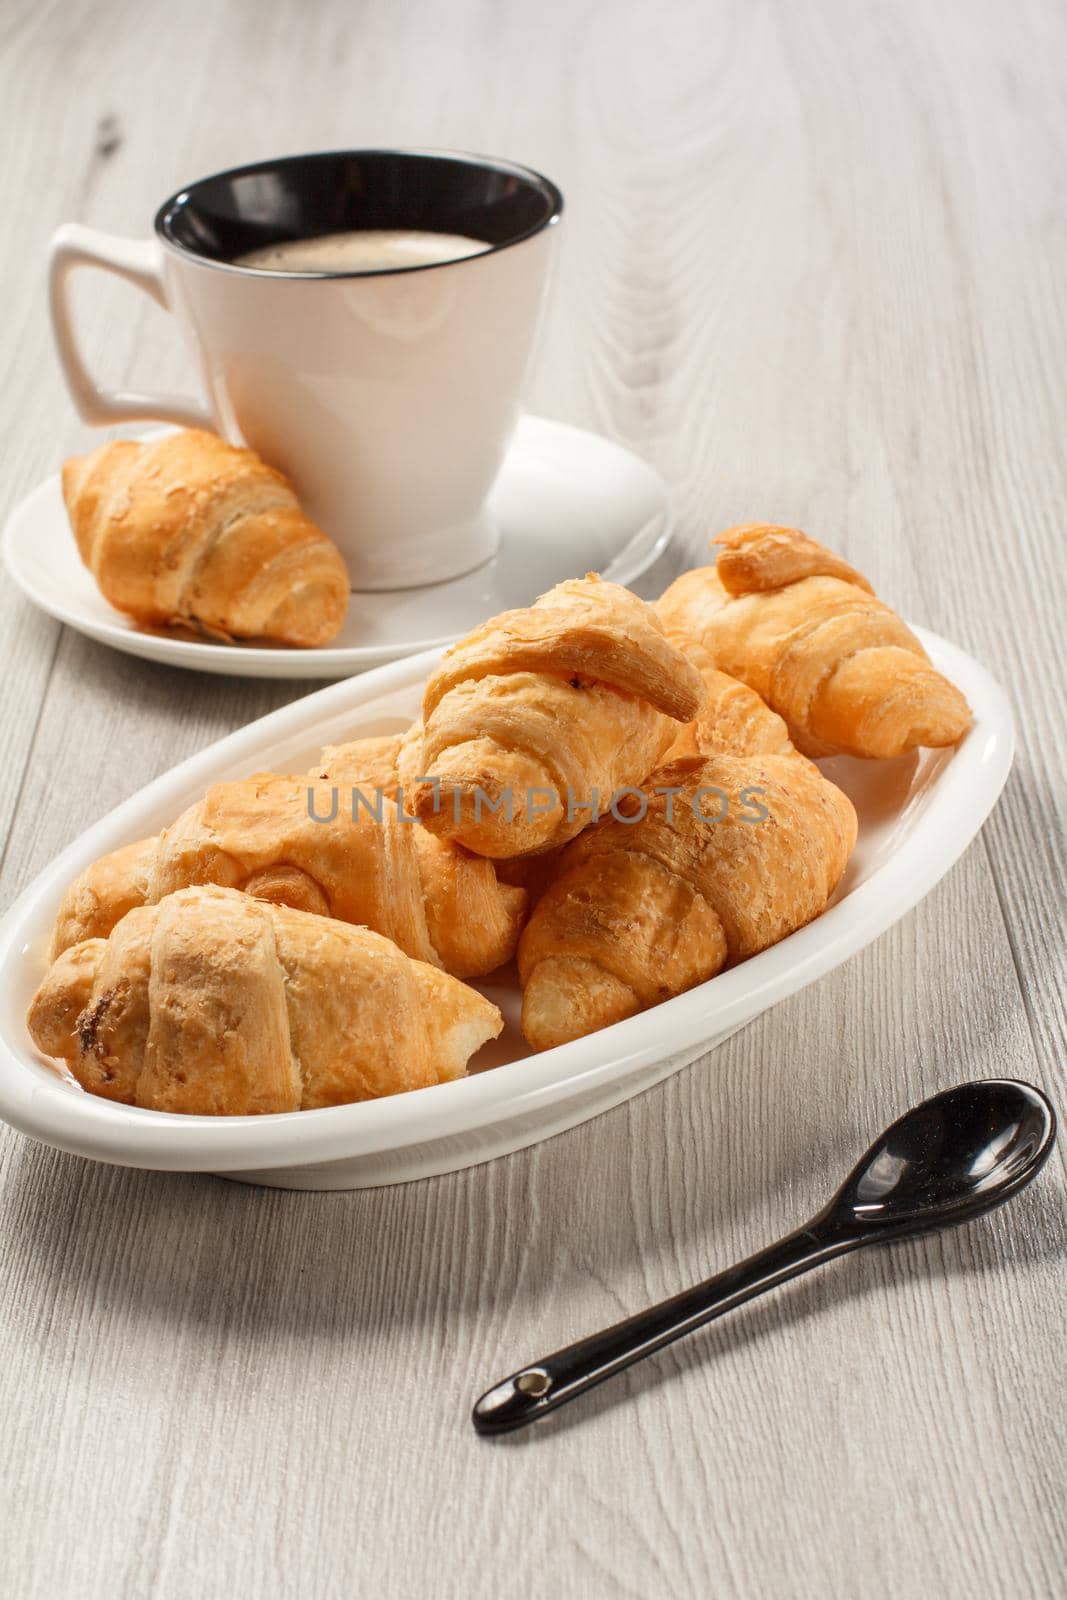 Fresh croissants on white porcelain dish, cup of black coffee with saucer on background